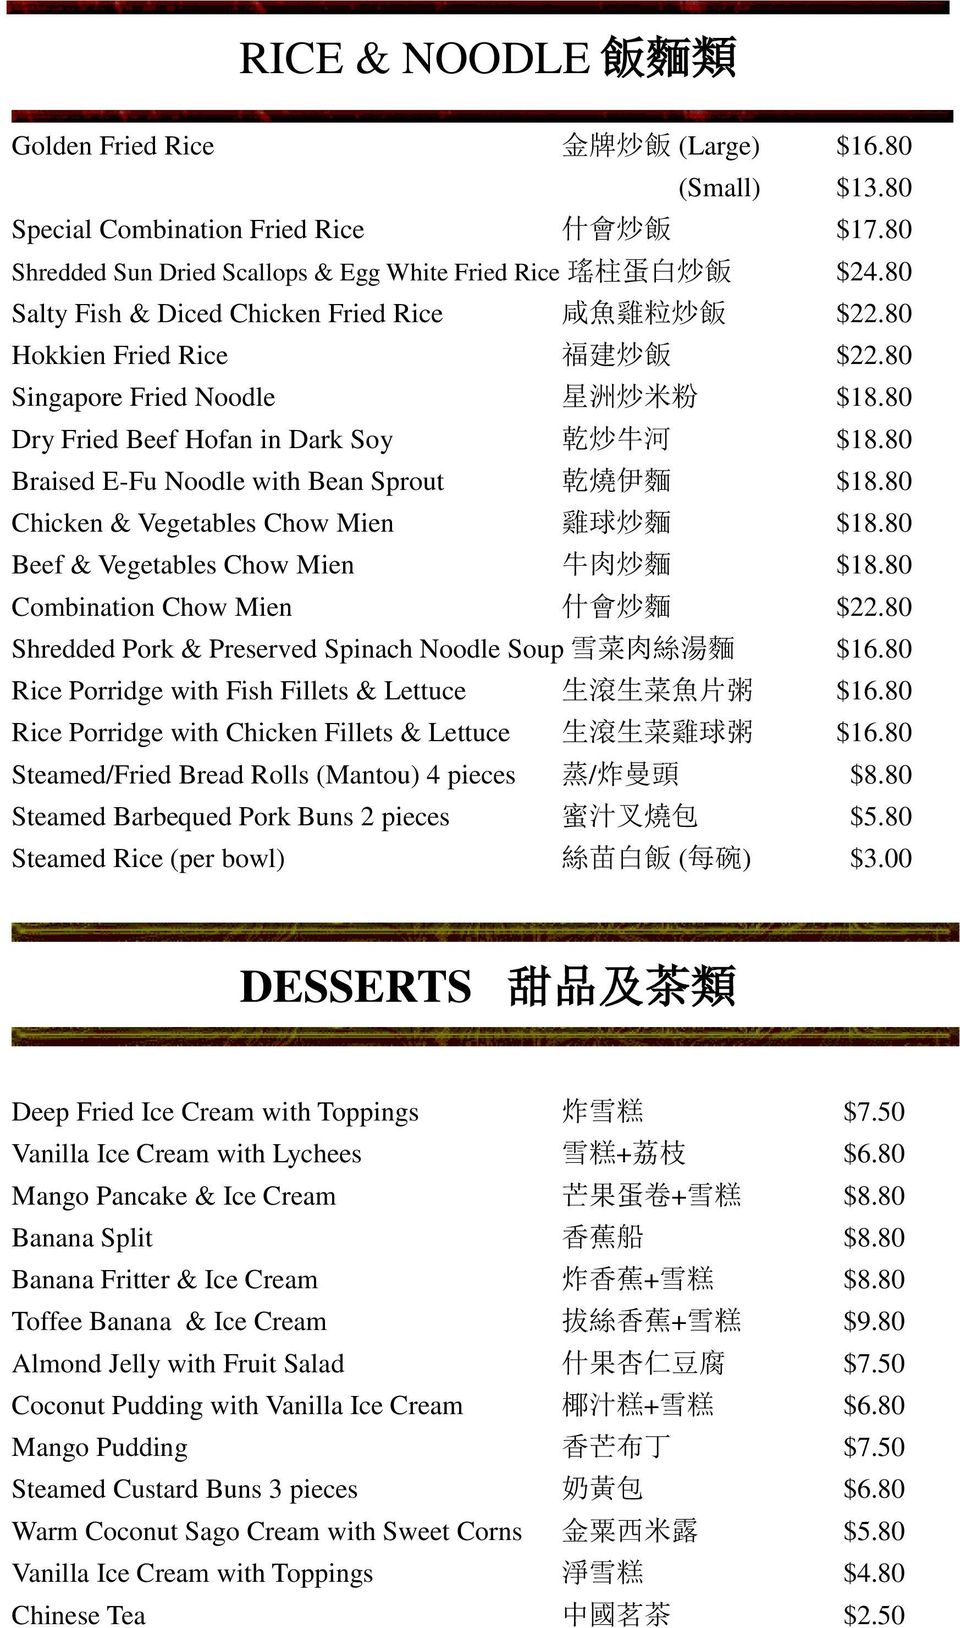 80 Braised E-Fu Noodle with Bean Sprout 乾 燒 伊 麵 $18.80 Chicken & Vegetables Chow Mien 雞 球 炒 麵 $18.80 Beef & Vegetables Chow Mien 牛 肉 炒 麵 $18.80 Combination Chow Mien 什 會 炒 麵 $22.